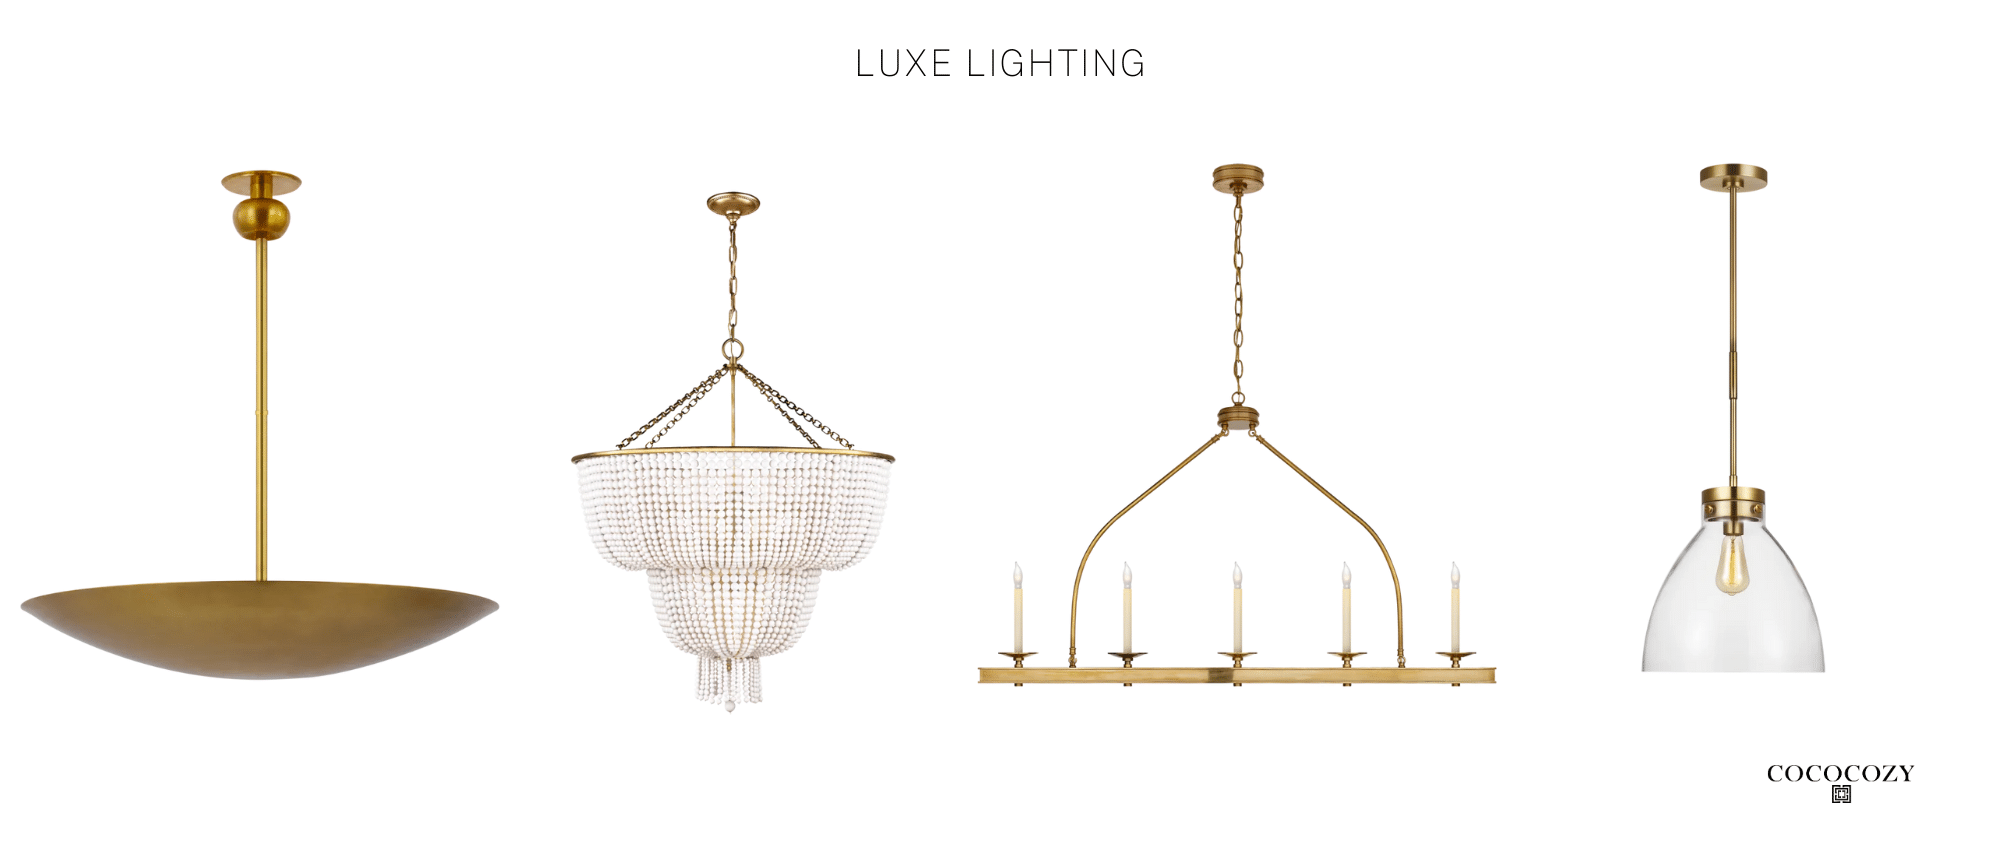 Alt tag for luxe-lighting-interior-design-expensive-home-gold-pendant-light-cococozy